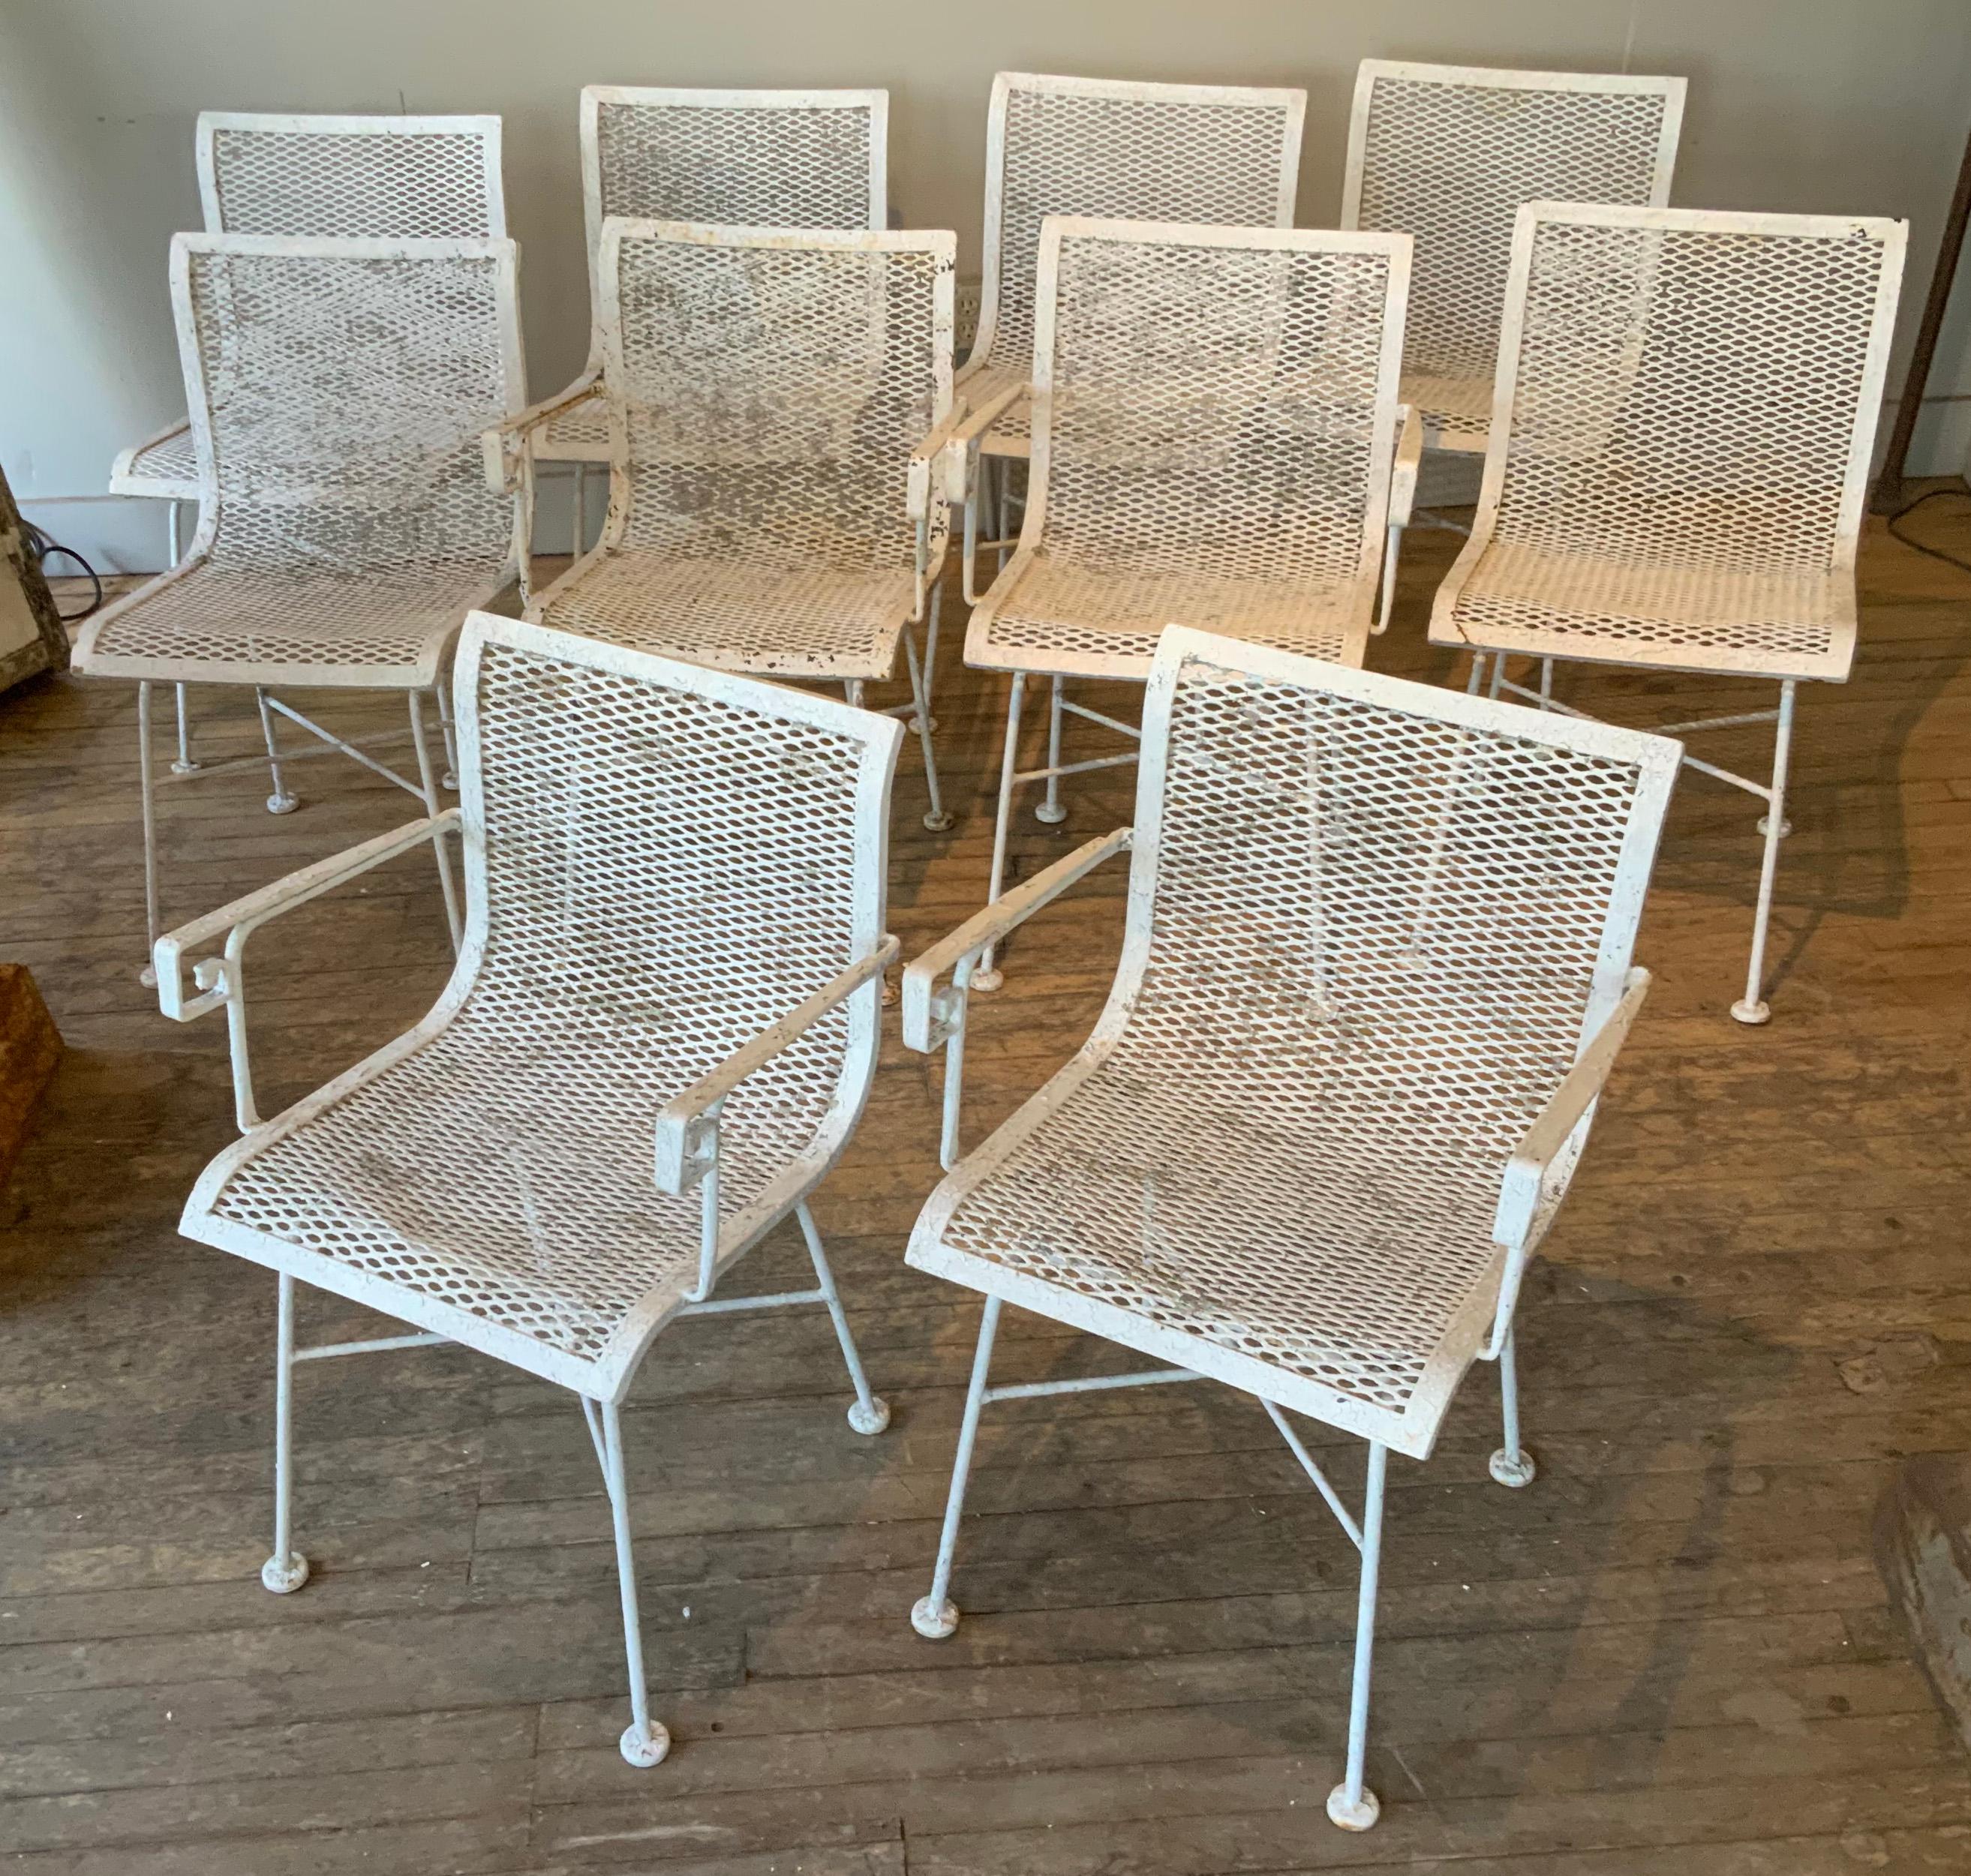 a large set of 10 wrought iron dining chairs, c. 1950, by Meadowcraft. the chairs are iron mesh, with subtle curved seats and backs, and a very nice Greek Key detail in the arm of the armchairs. the set includes 6 armless chairs and 4 armchairs.